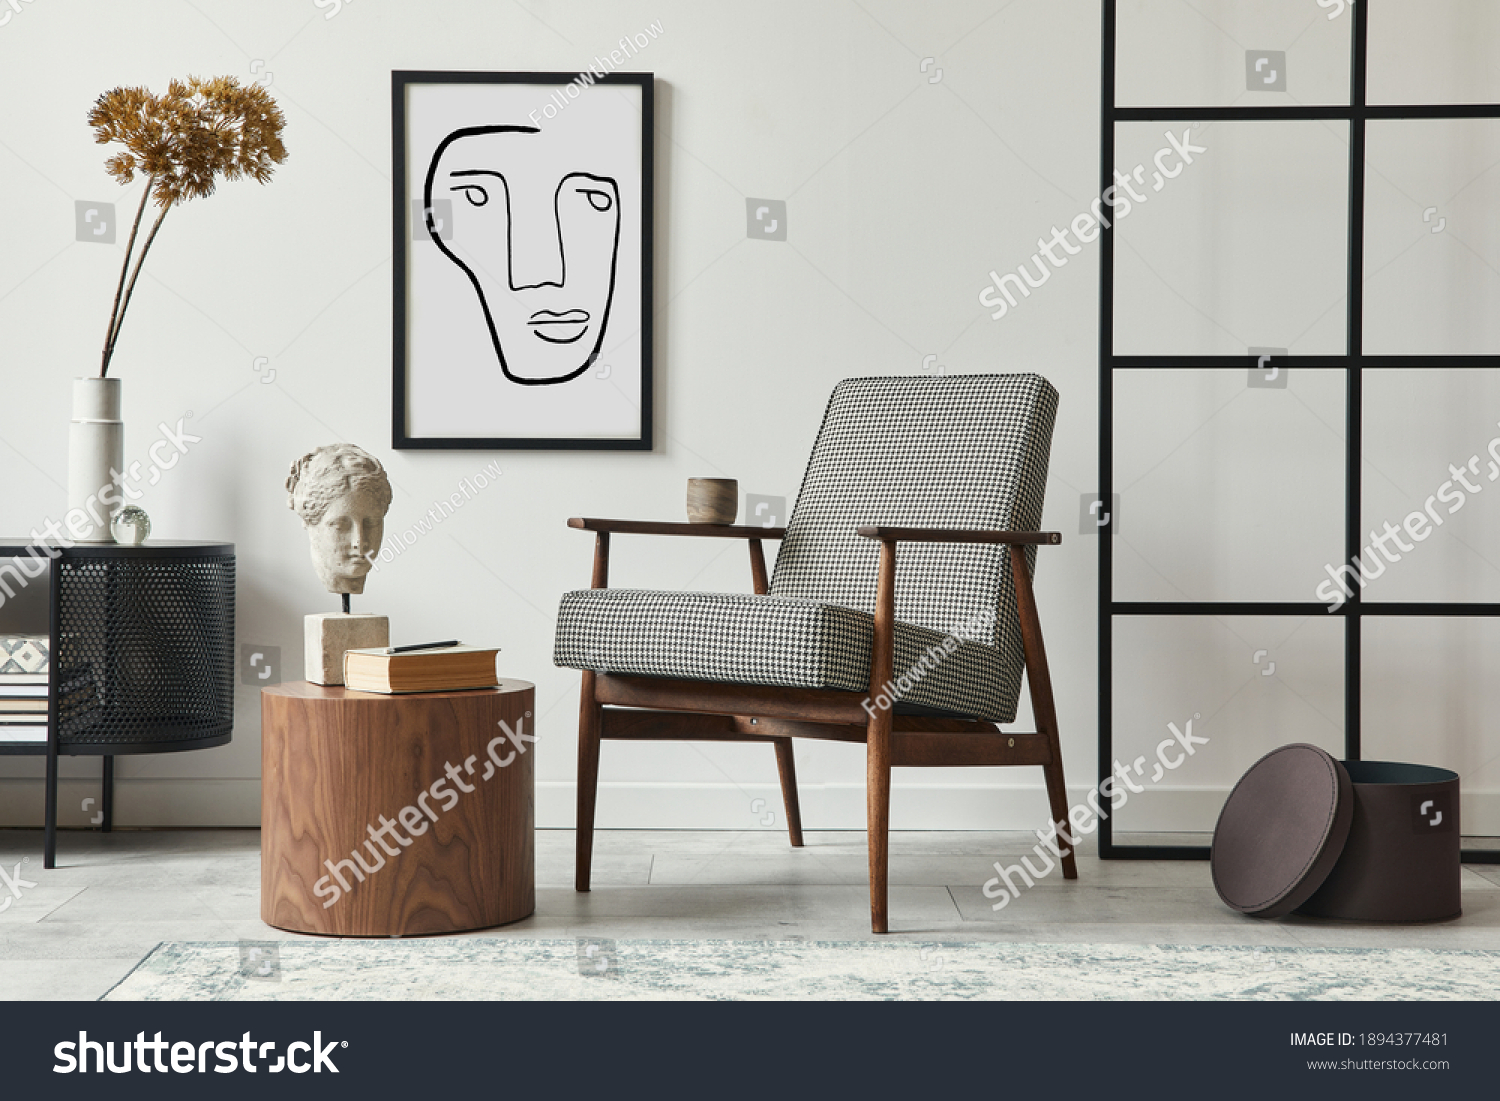 Stylish scandinavian composition of living room with design armchair, black mock up poster frame, commode, wooden stool, book, decoration, loft wall and personal accessories in modern home decor. #1894377481